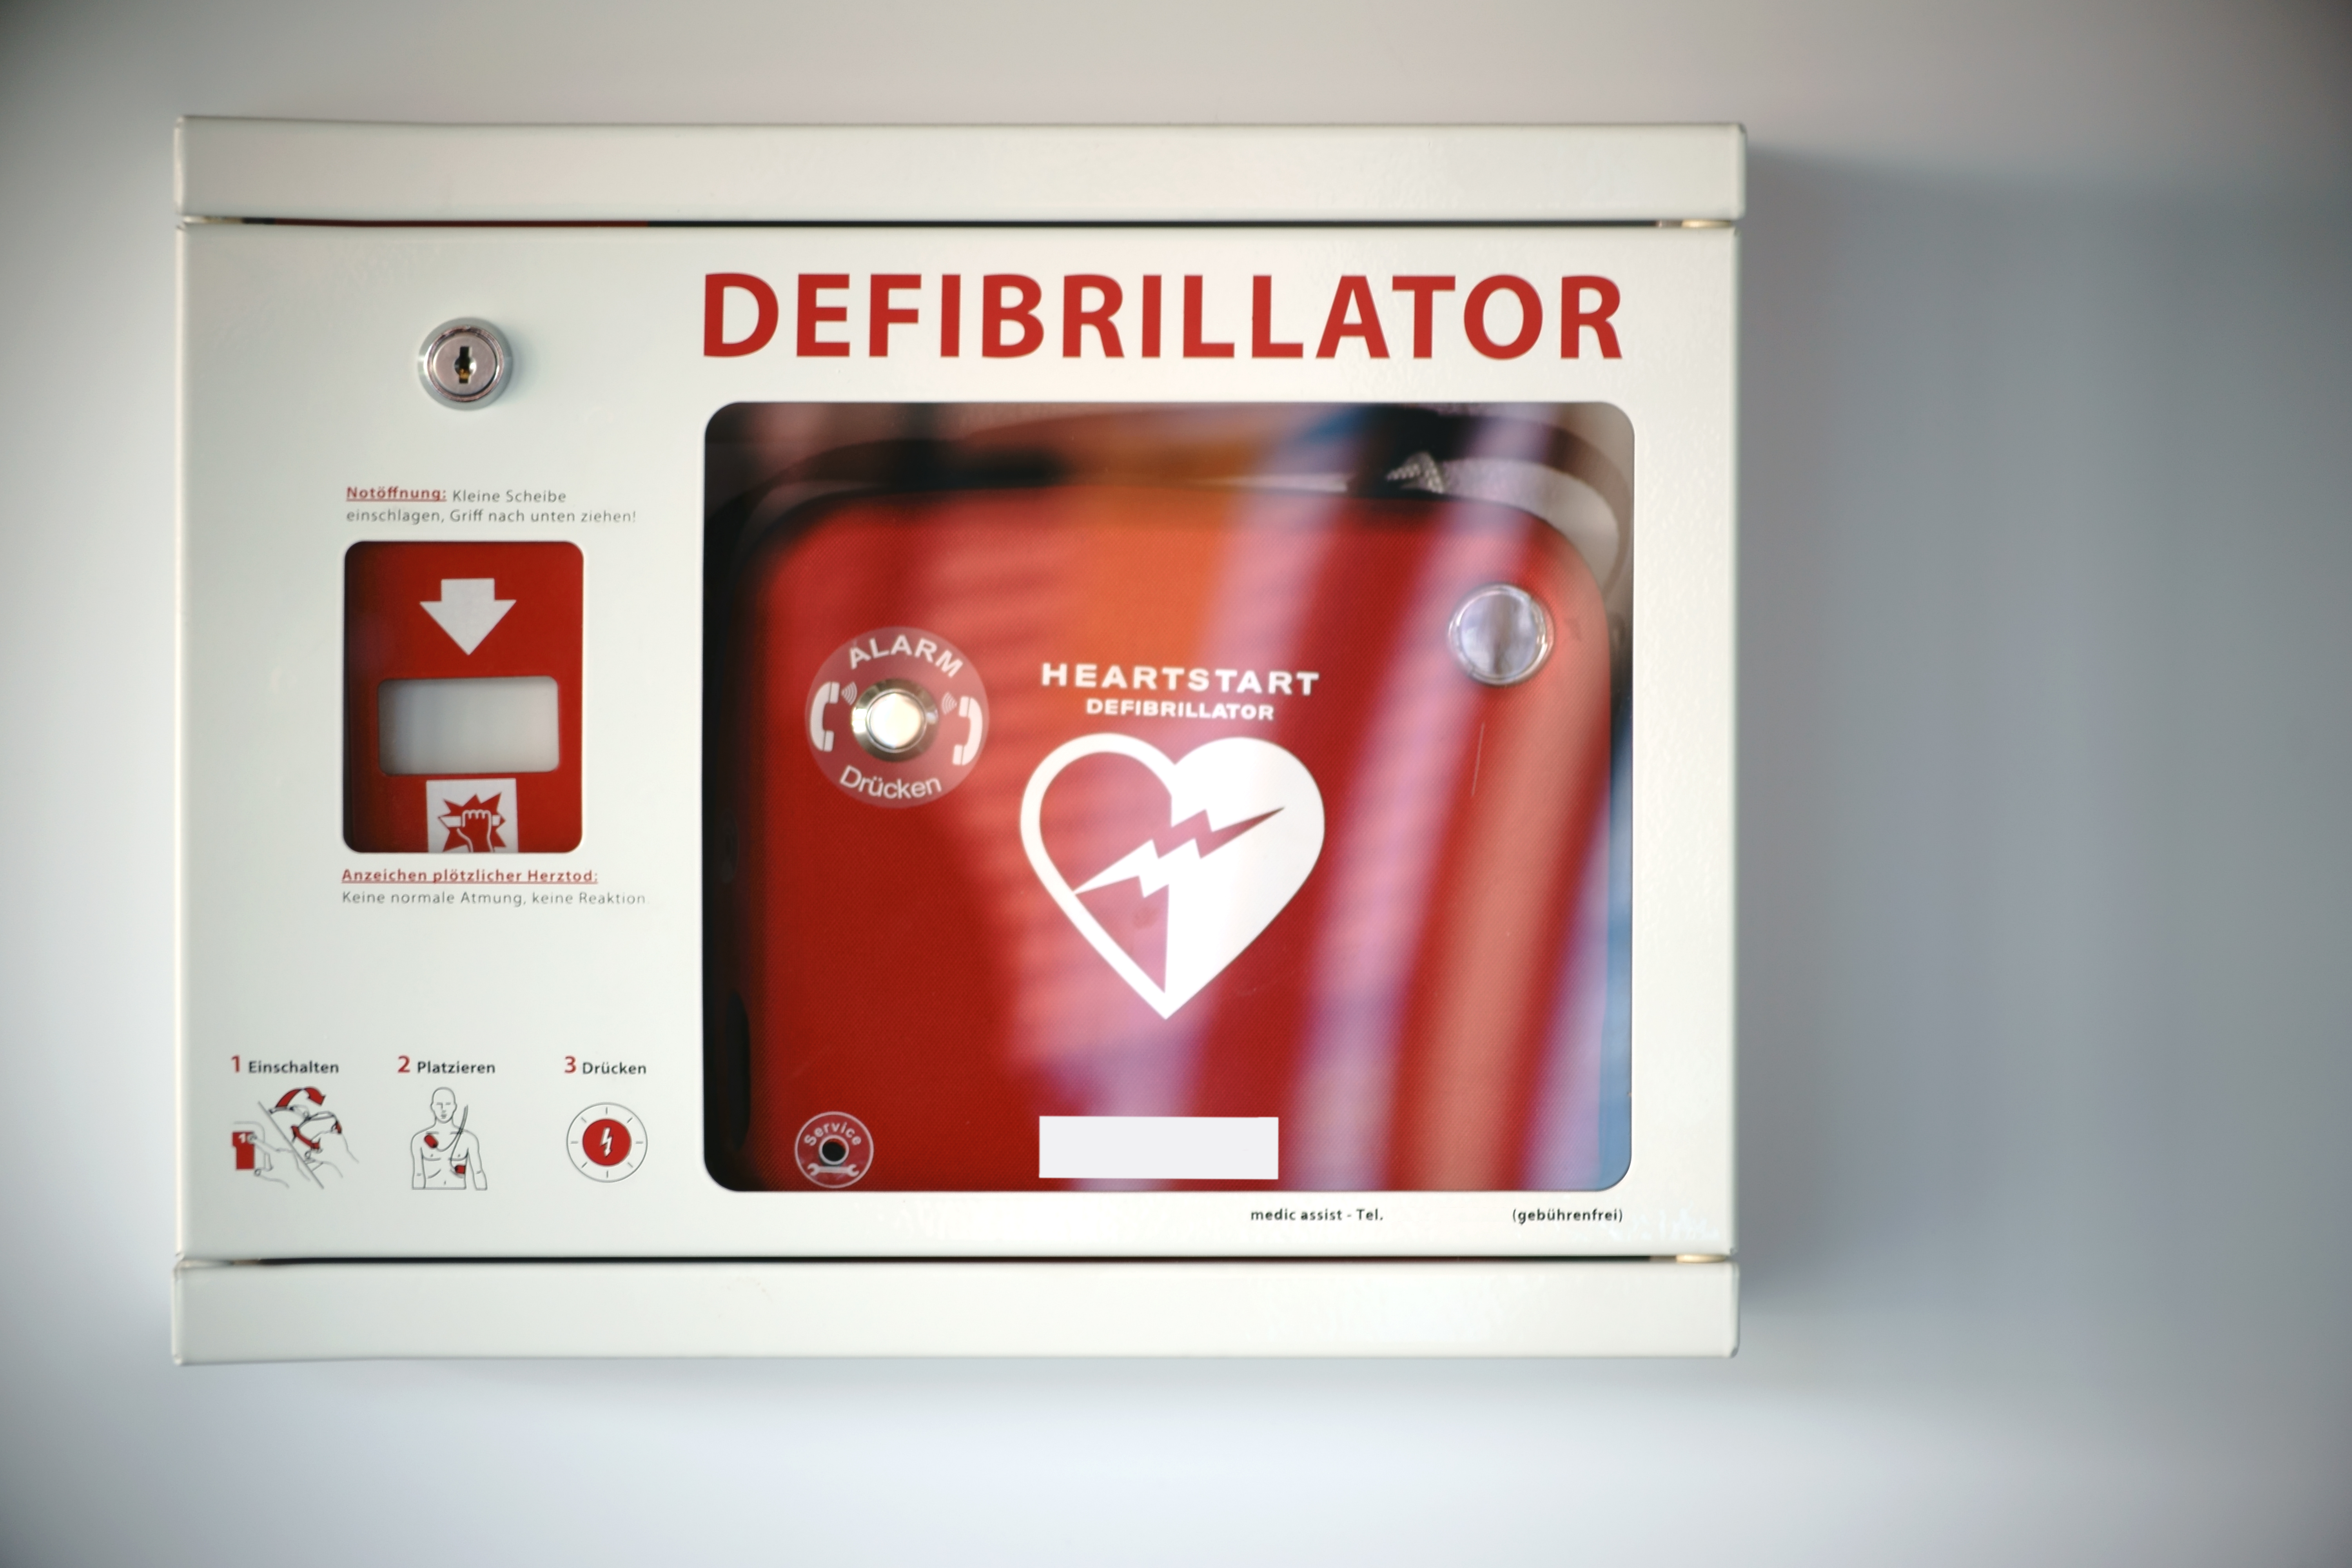 Defibrillator's Fitted Into CWS Welfare Units